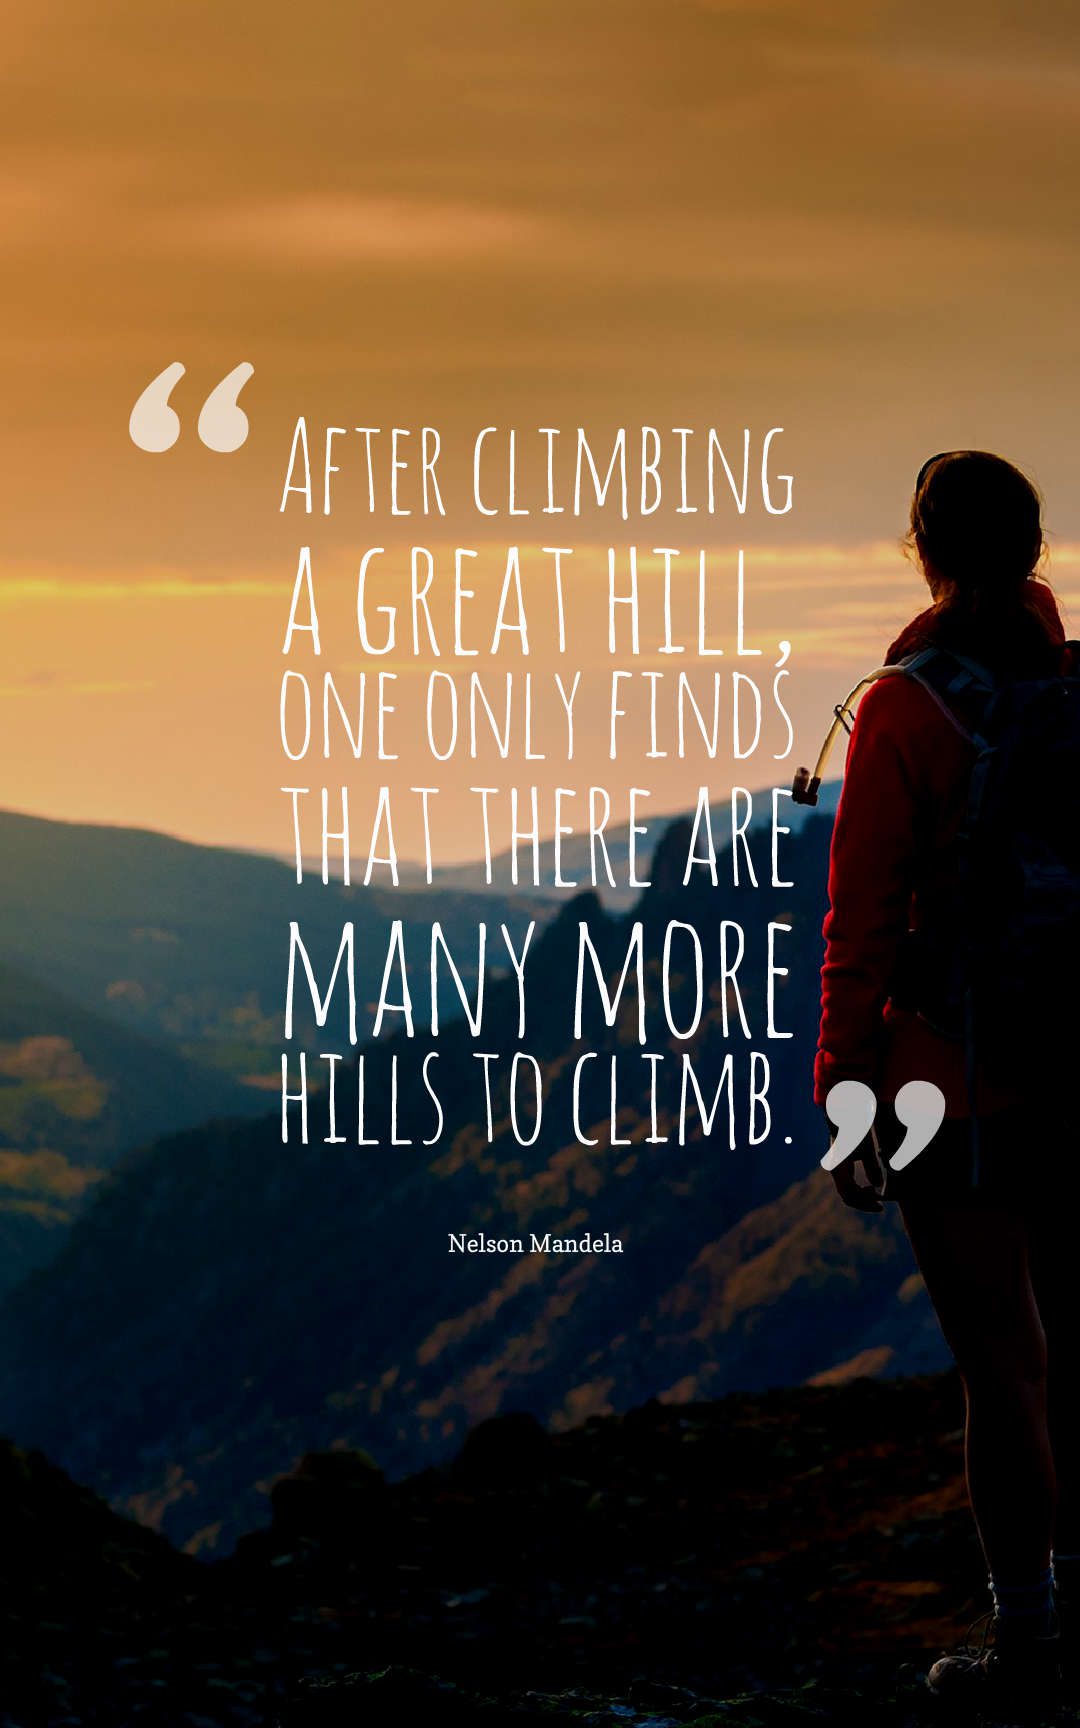 After climbing a great hill, one only finds that there are many more hills to climb.